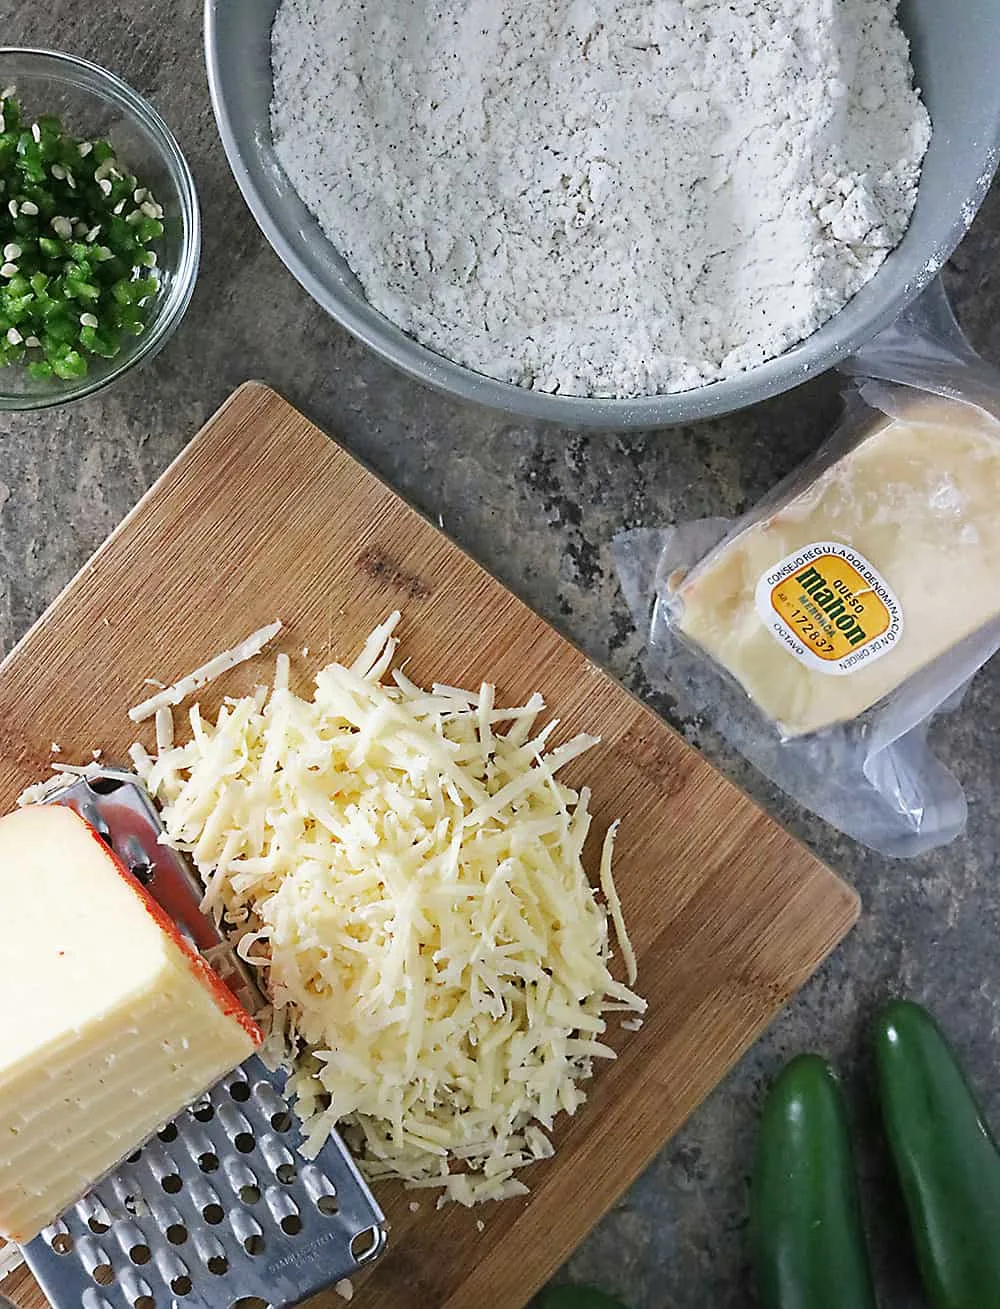 Photo Ingredients For Jalapeno Cheese Crackers With Mahon Cheese